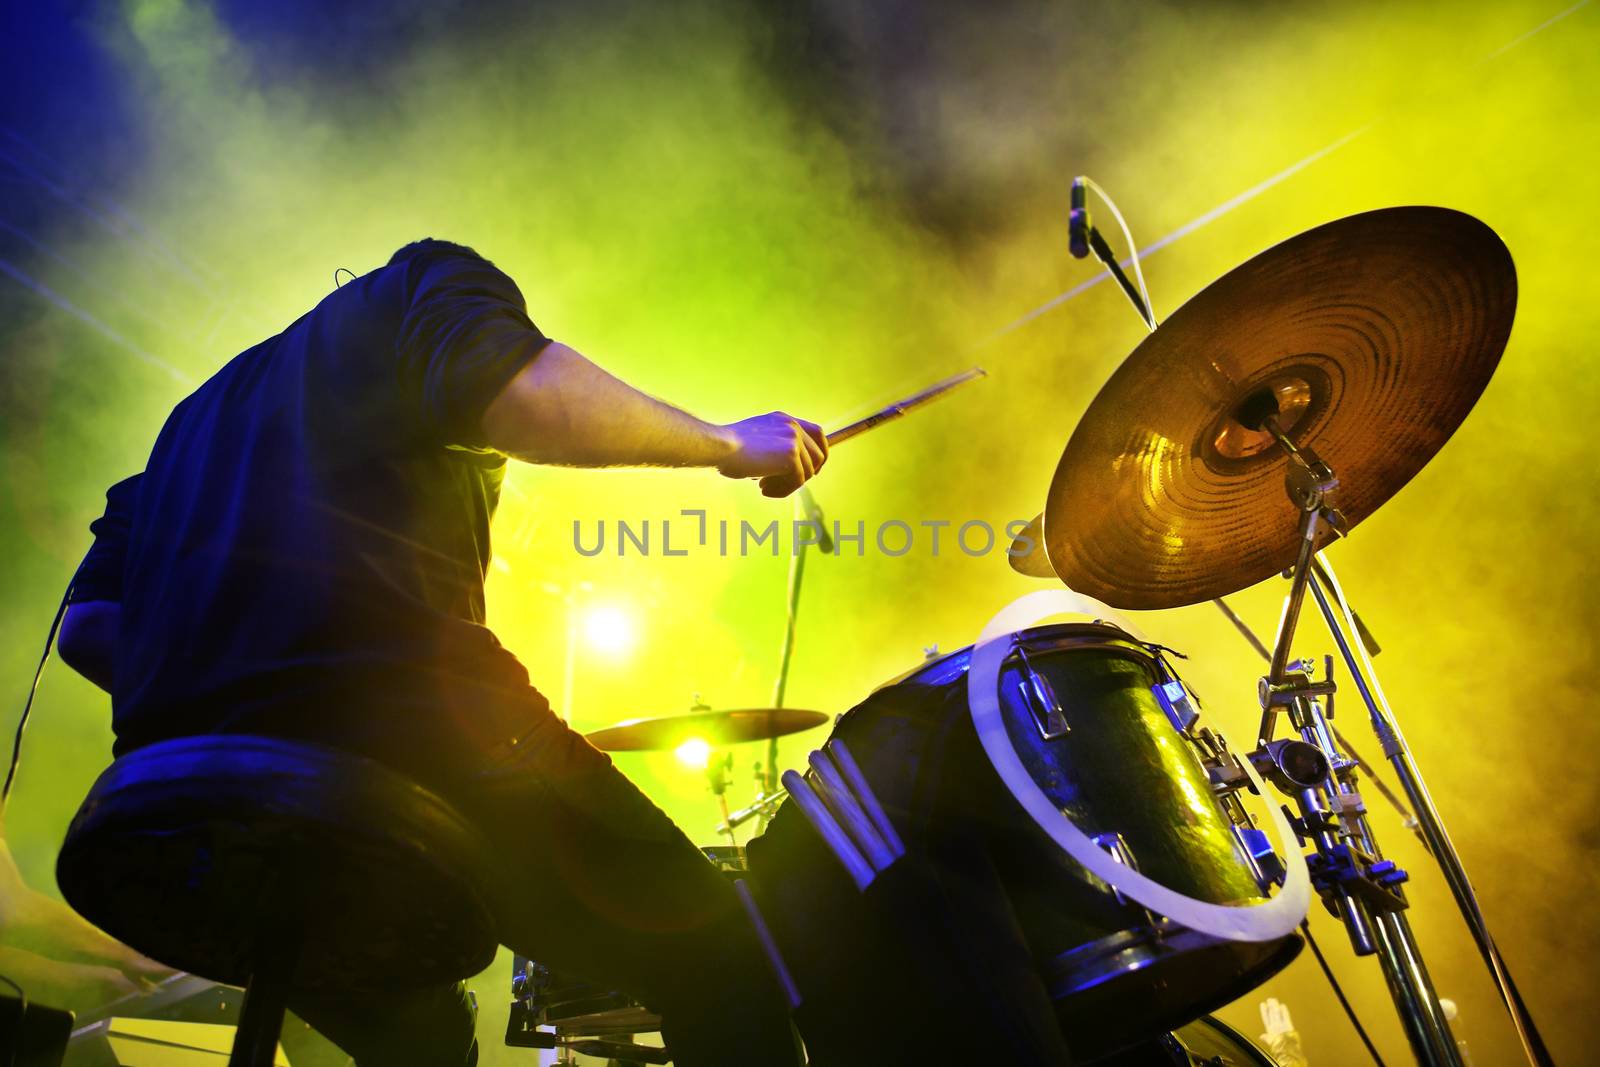 Live concert musician playing drums on stage with lights